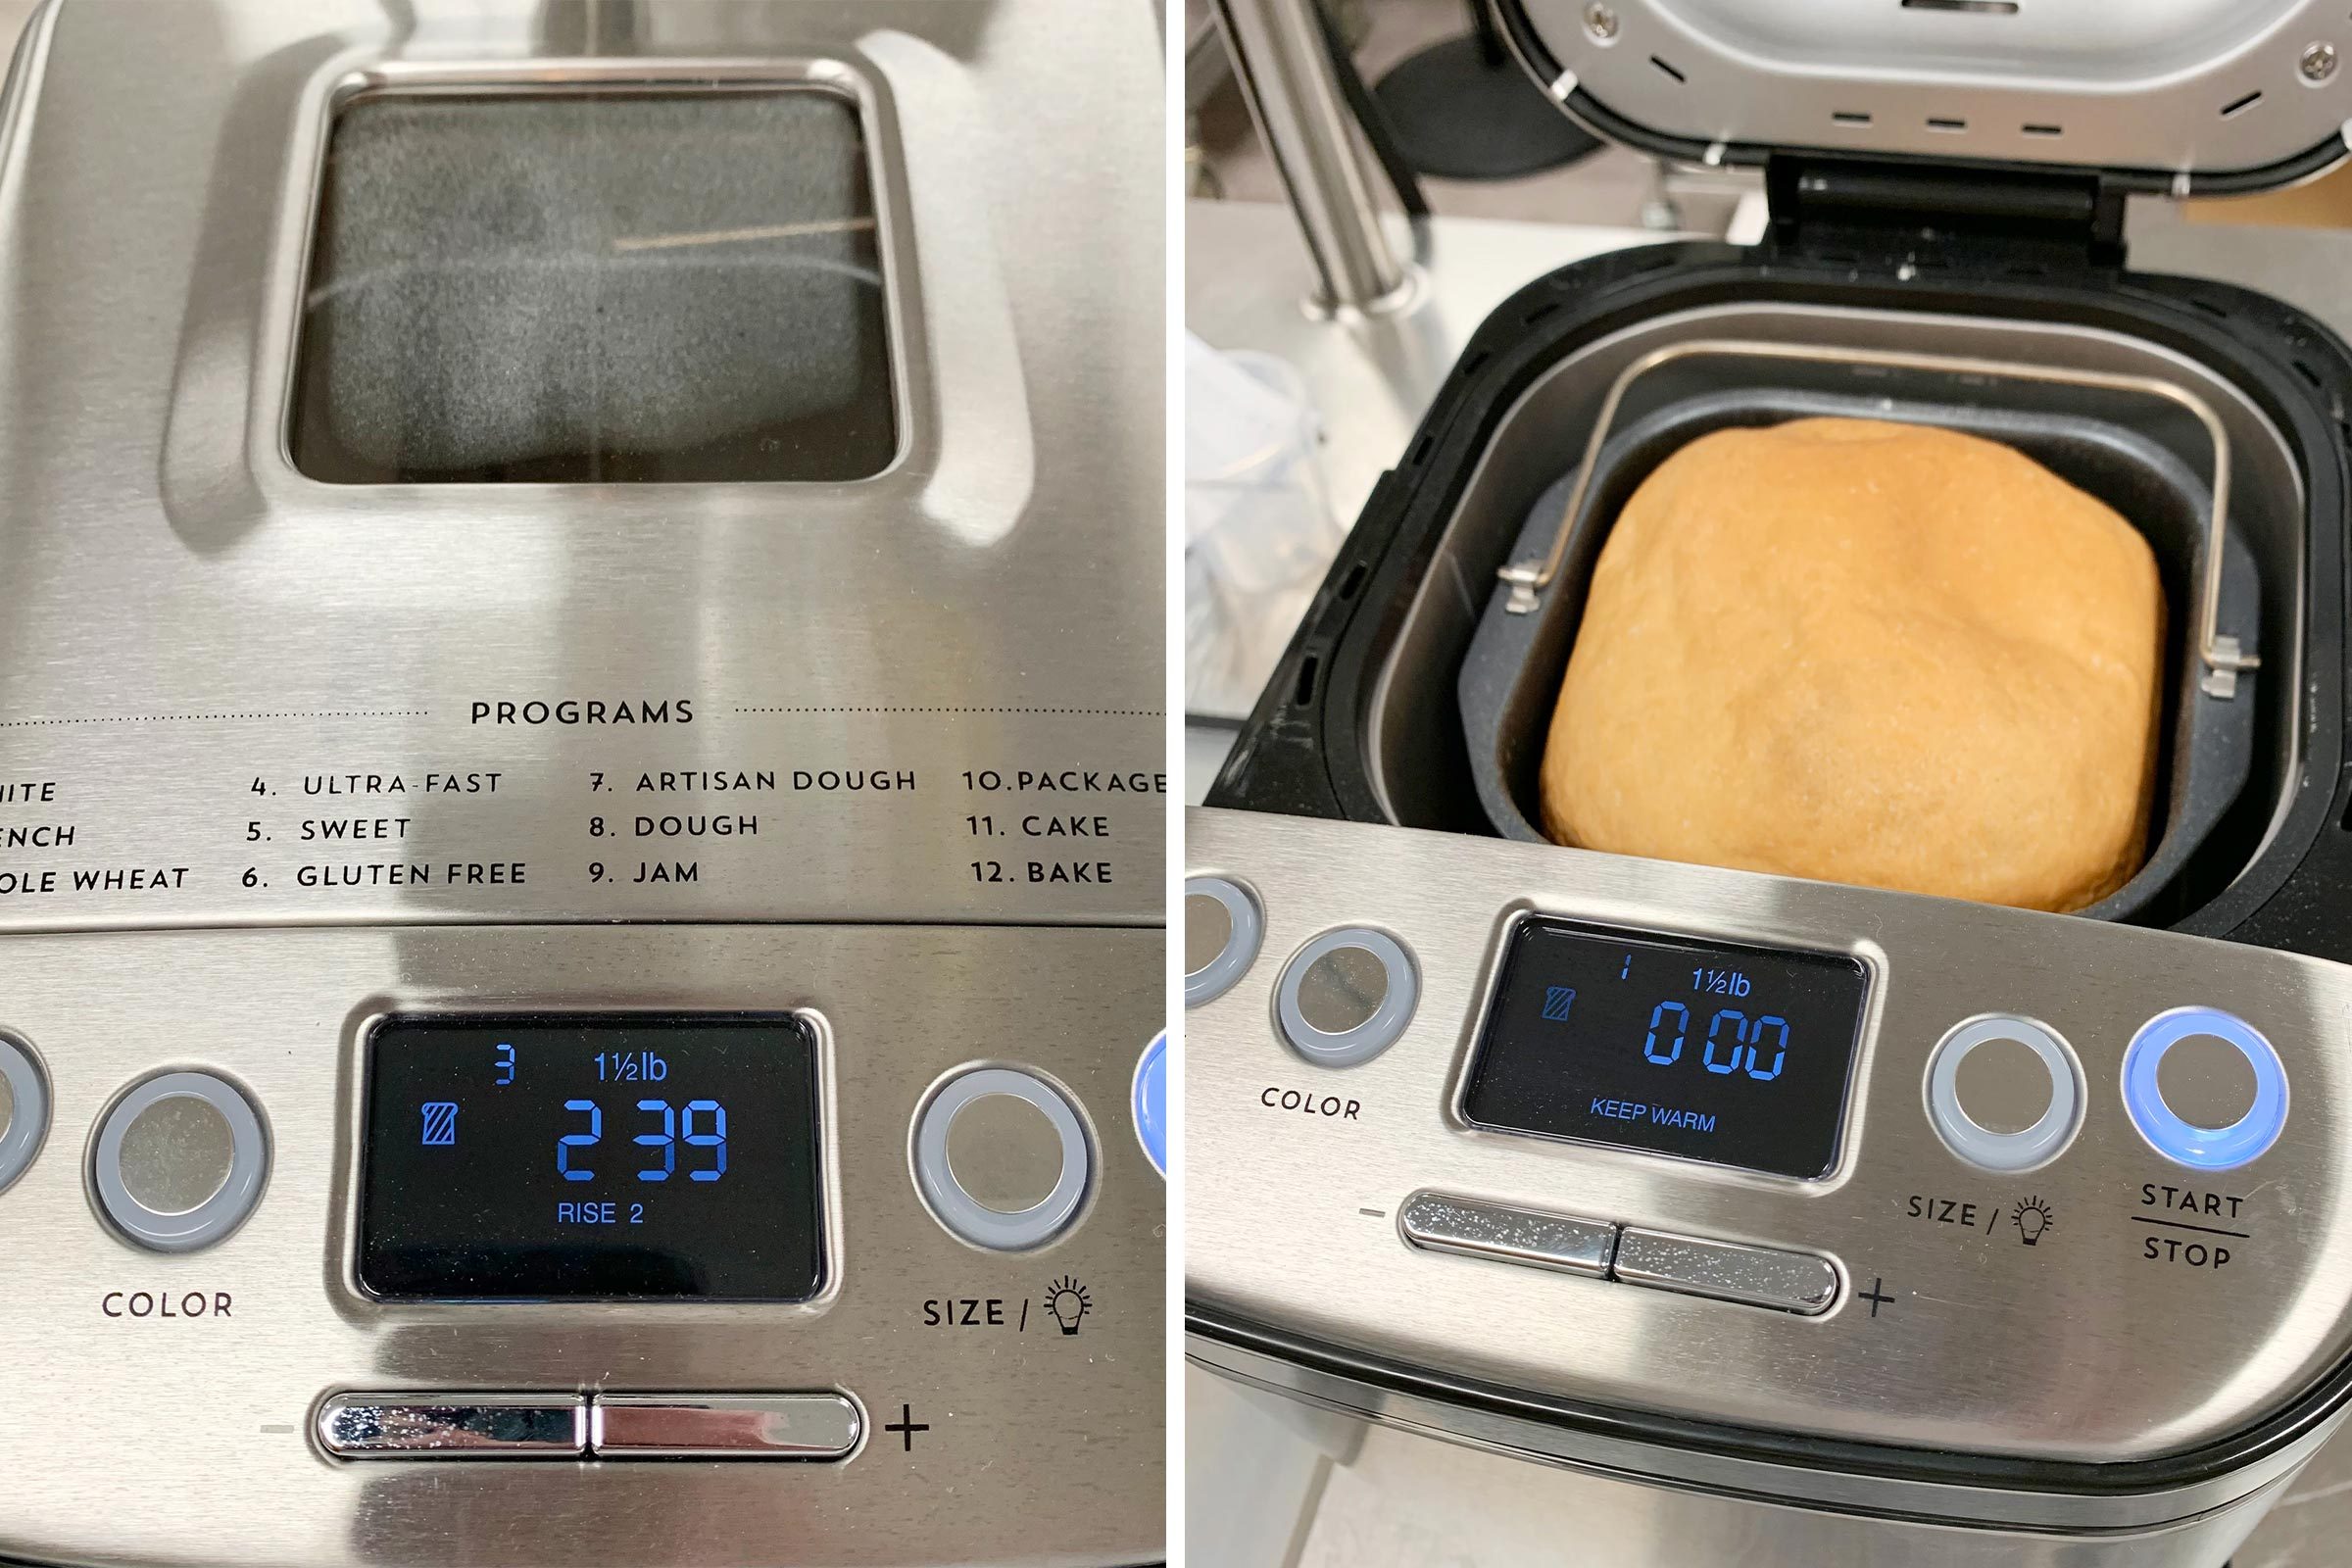 Cuisinart Compact Automatic Bread Maker & Reviews